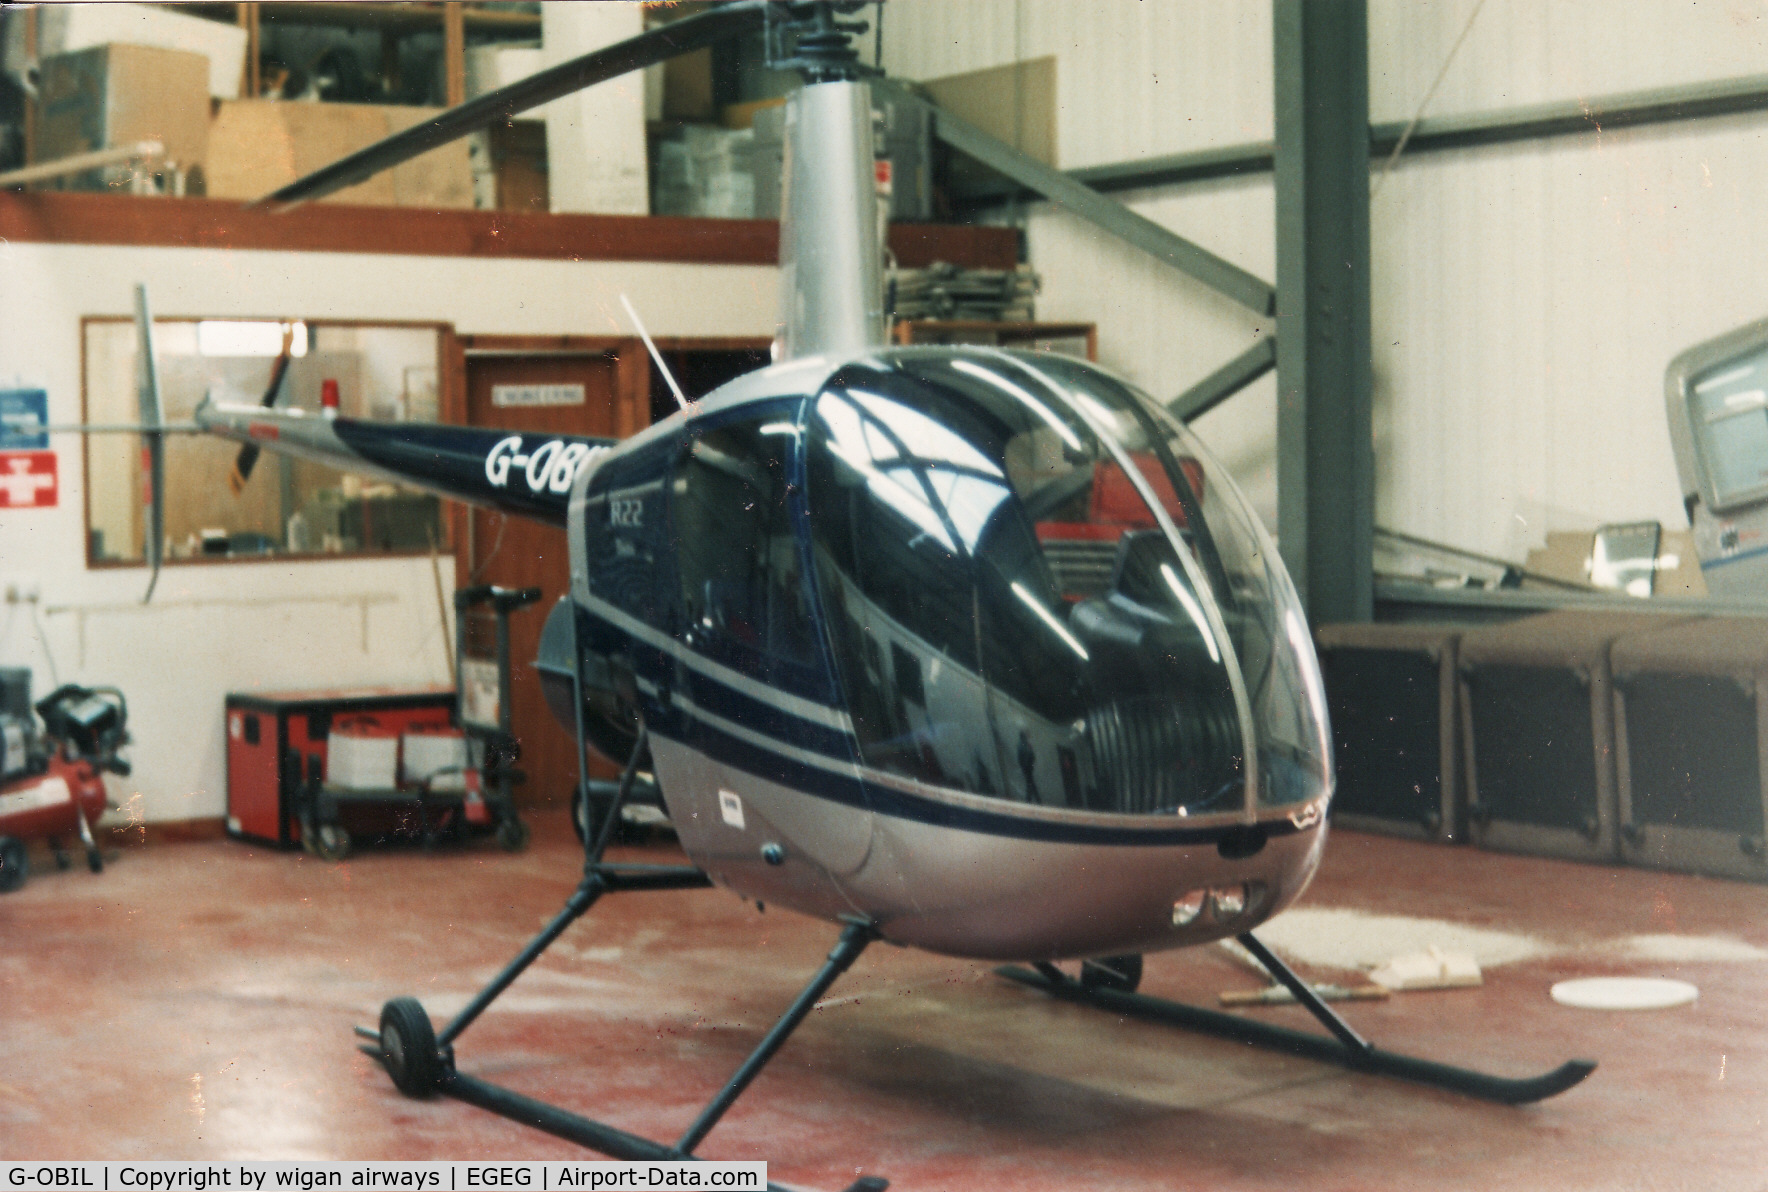 G-OBIL, 1988 Robinson R22 Beta II C/N 0792, in the hanger of Clyde Helicopters, Glasgow City Heliport